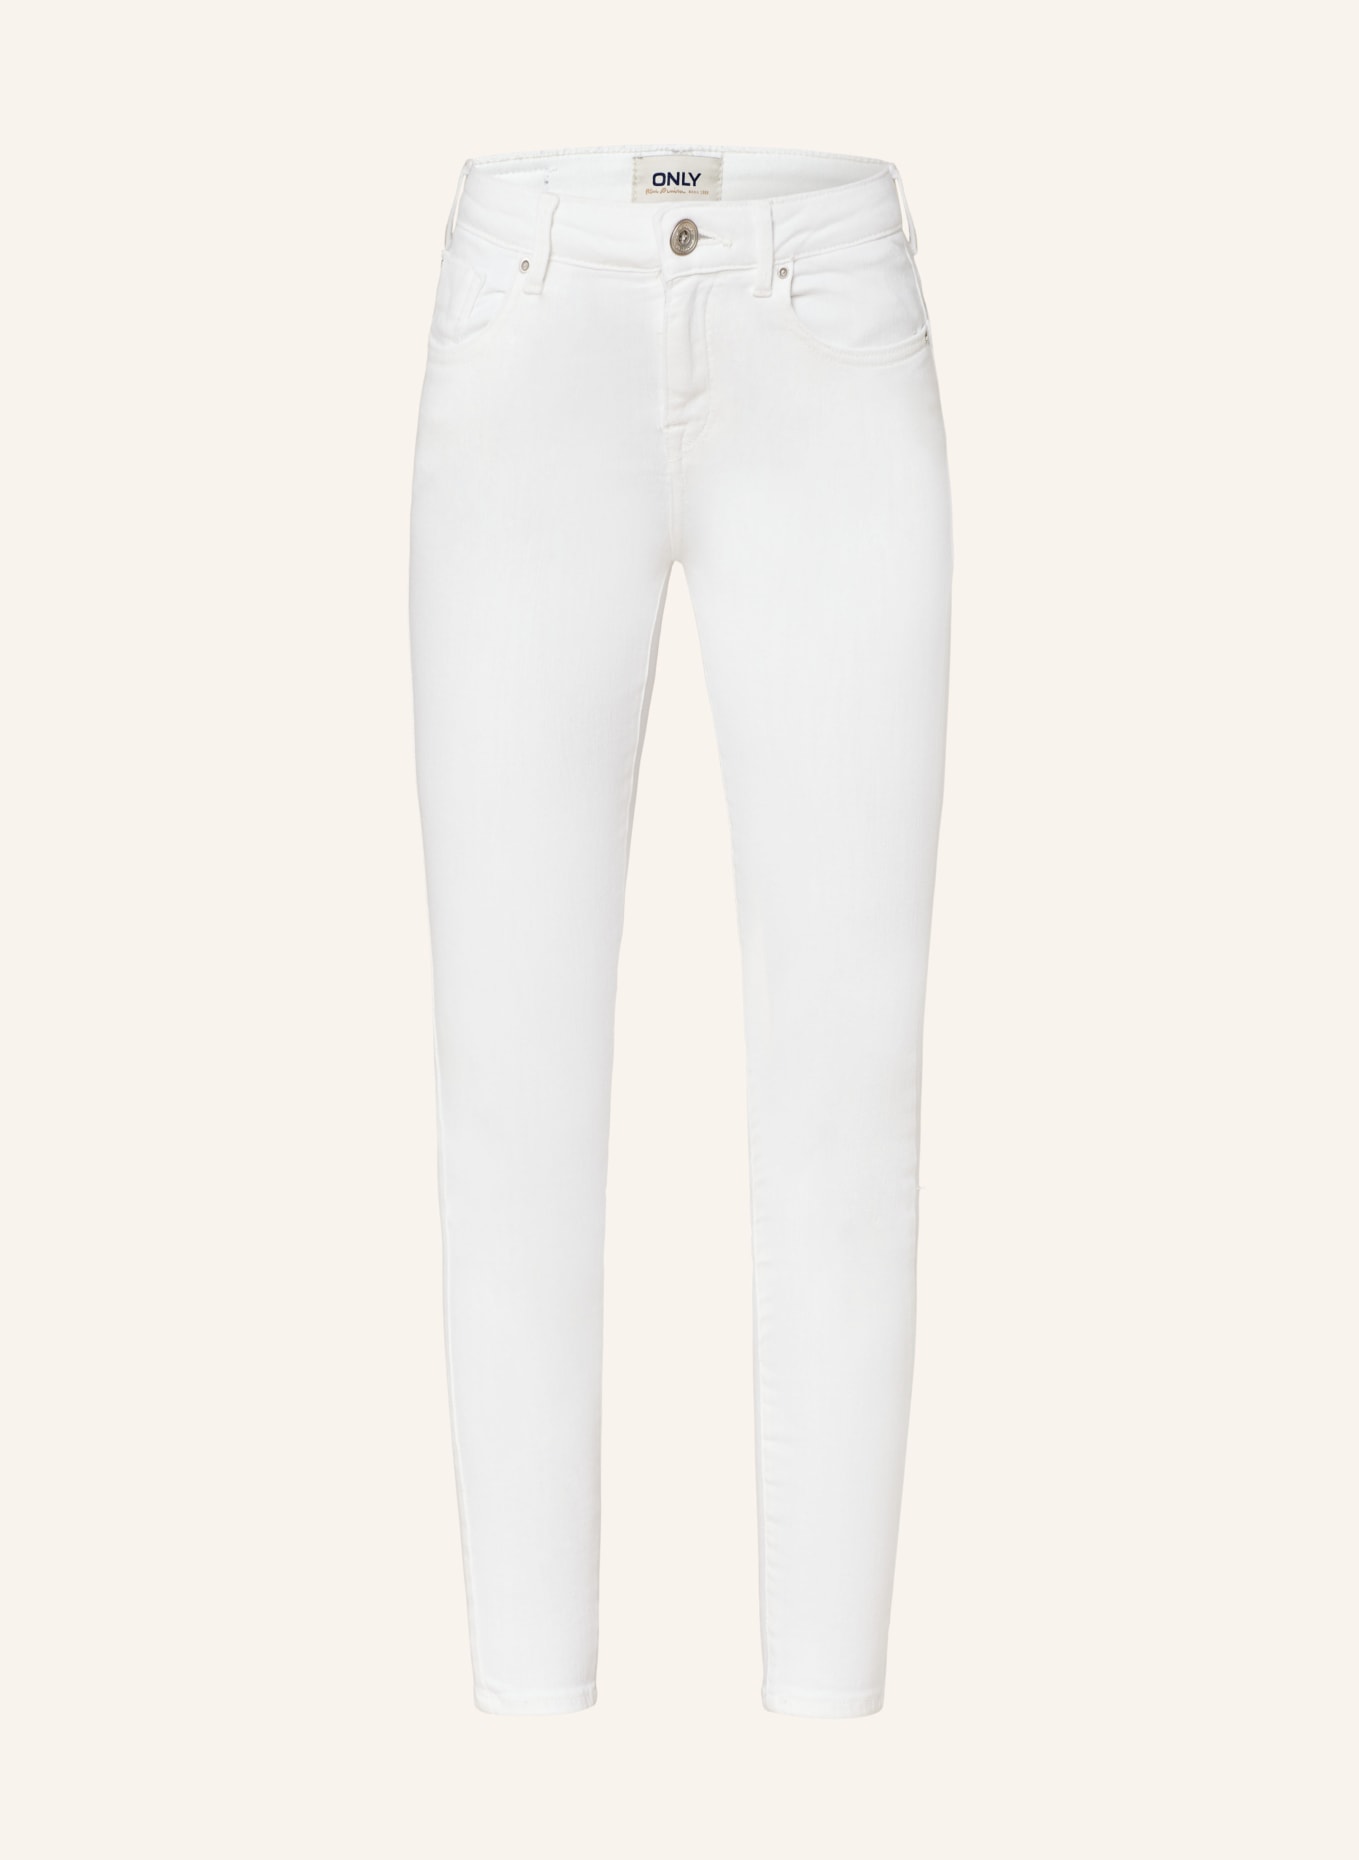 ONLY Skinny jeans, Color: WHITE (Image 1)